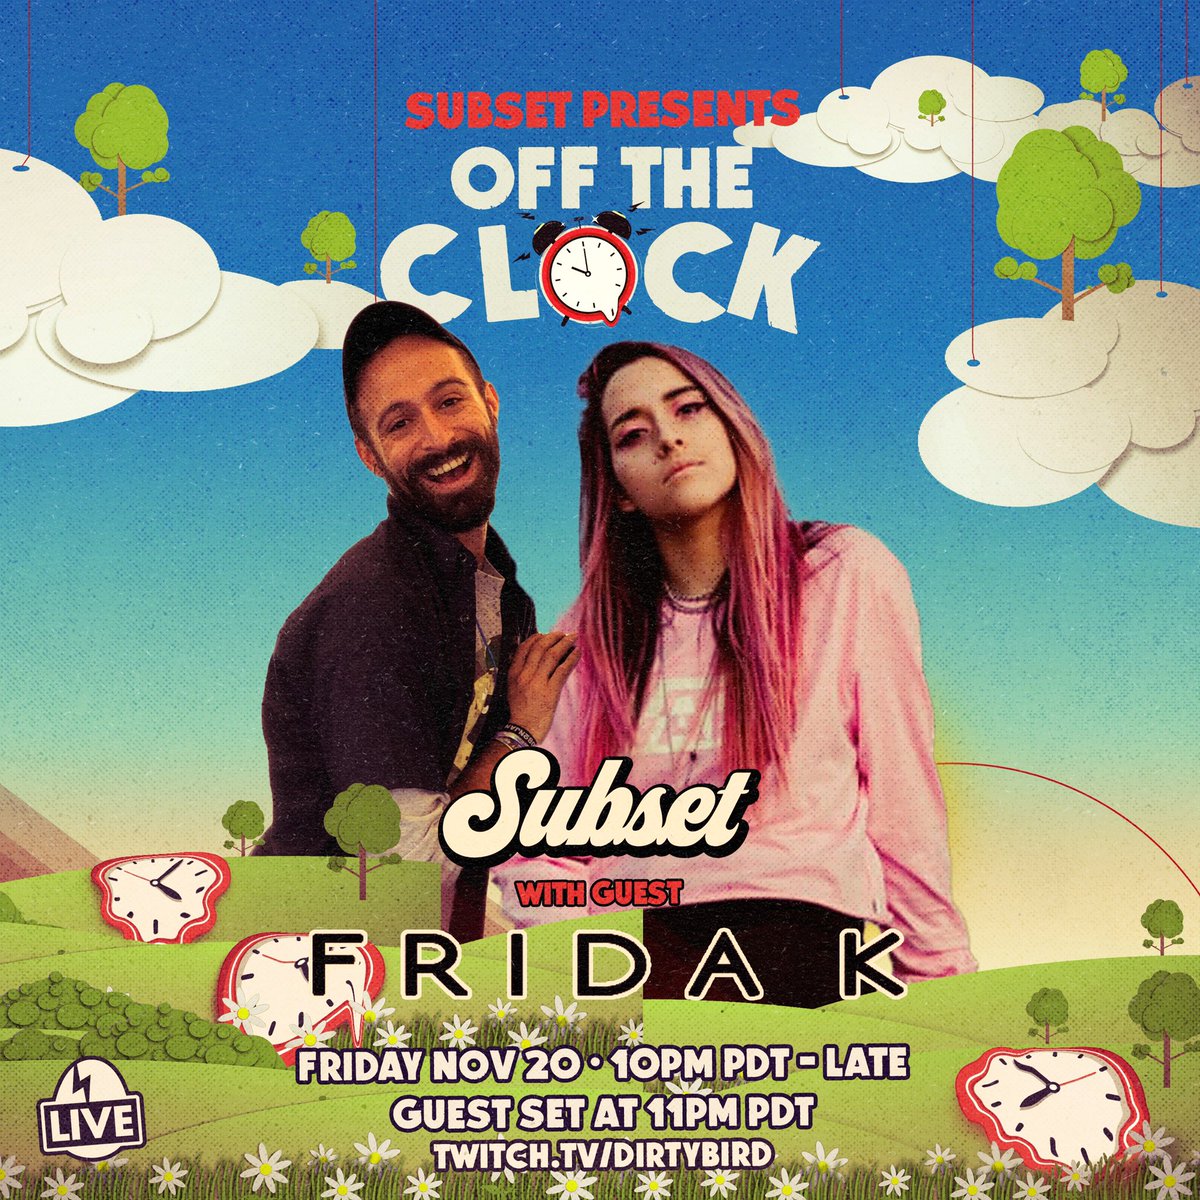 Let’s lose track of time together and go Off The Clock with @subsetgetsit & special guest @FridaKmusic 🕥🕐 Join the party → dirtybirdlive.tv